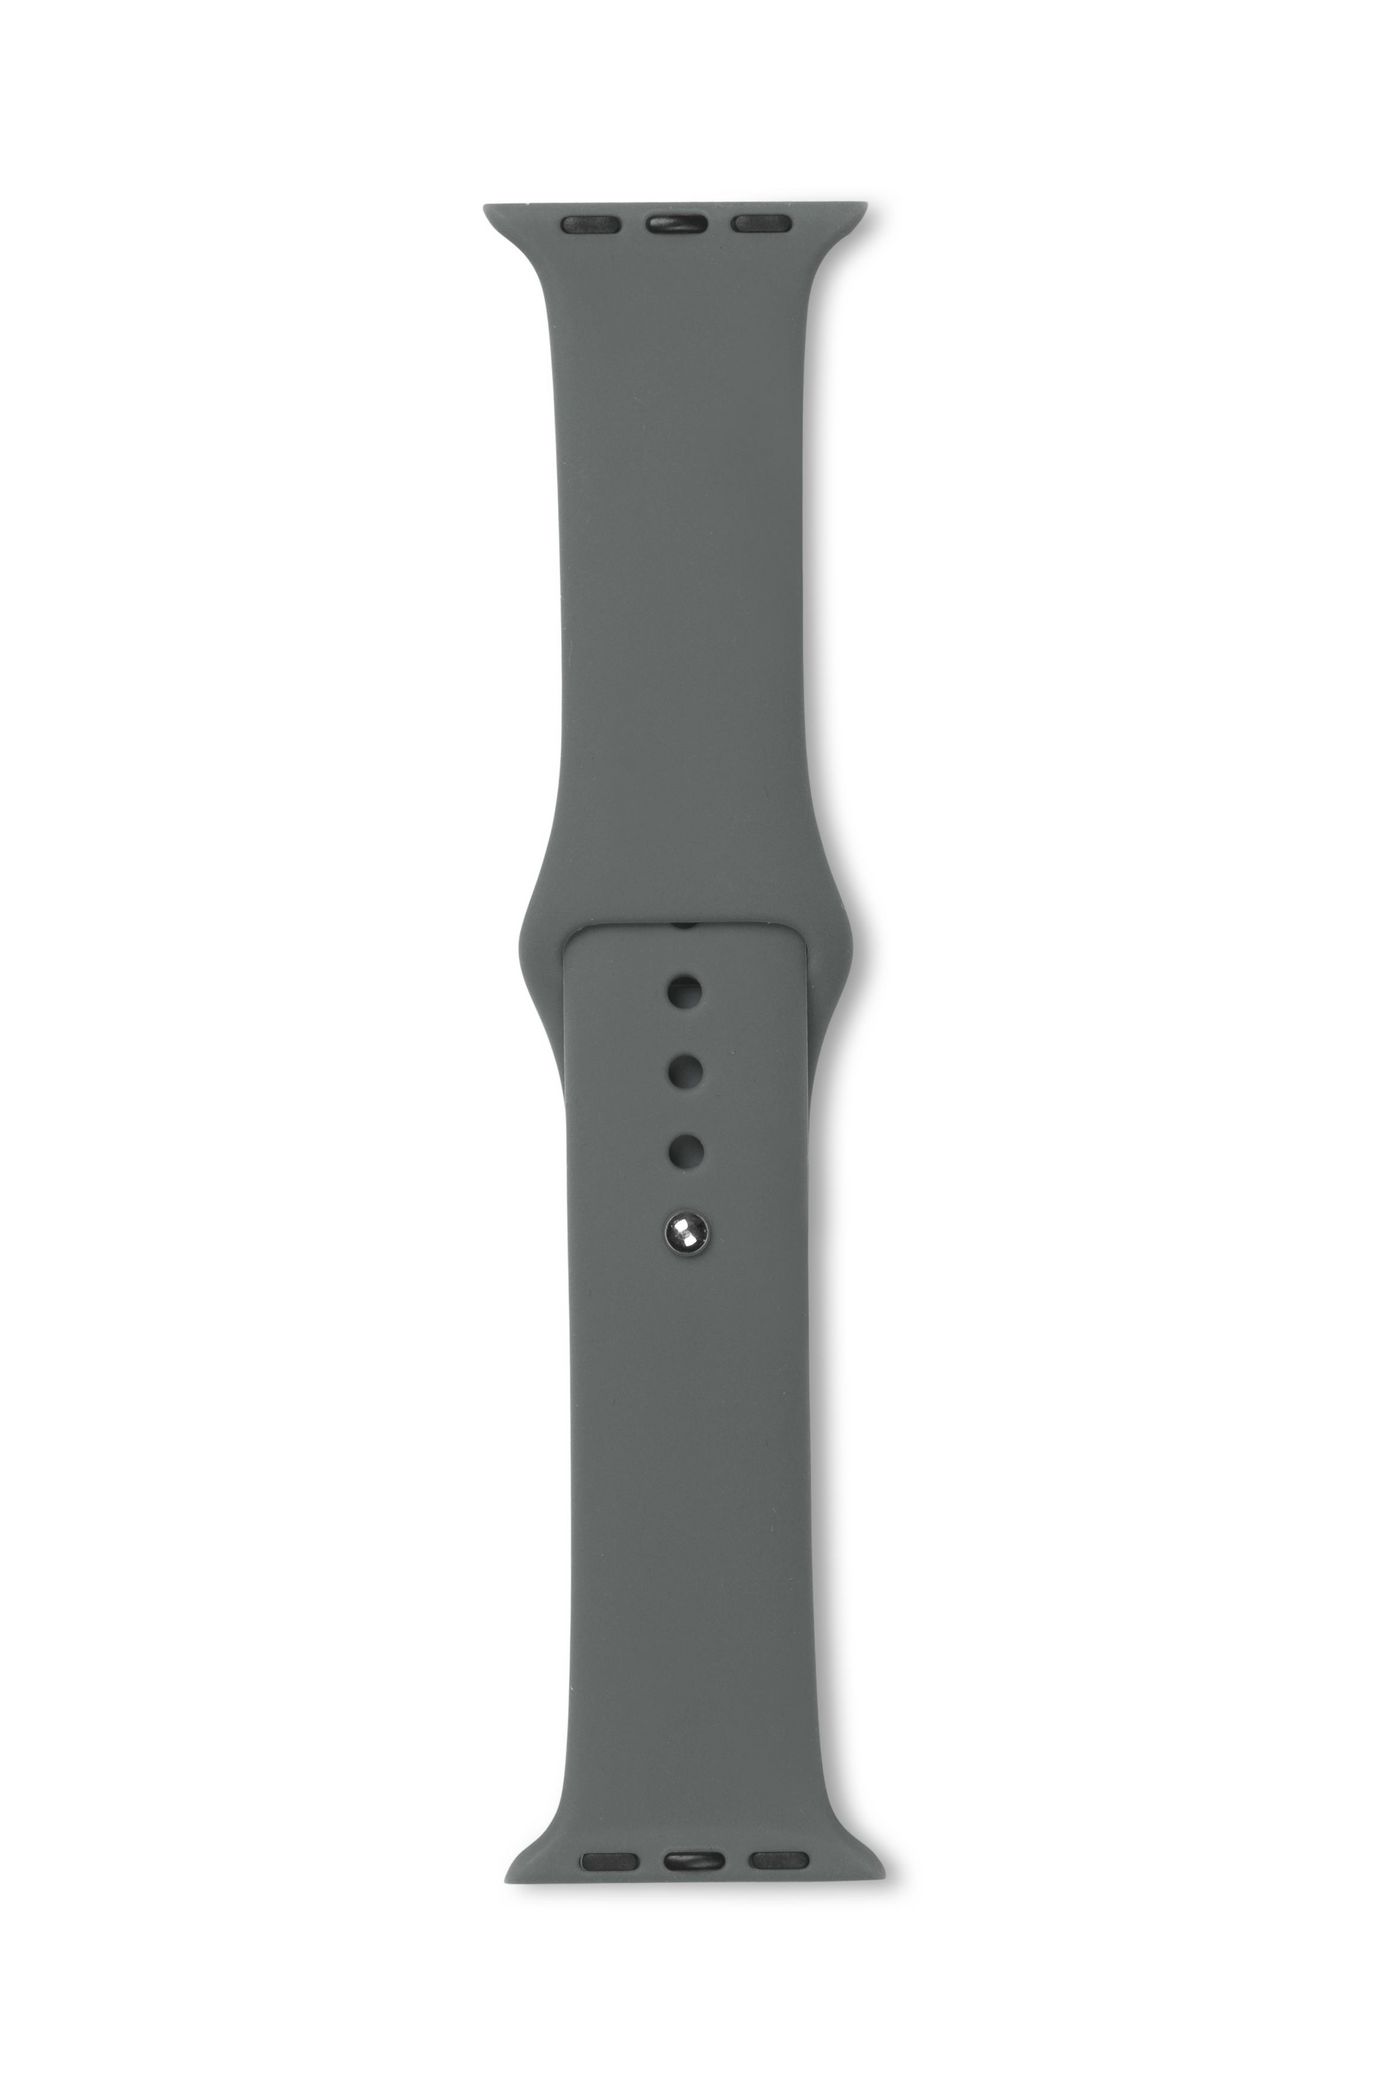 Apple Watch Silicone Strap Color: Olive. Width 40mm